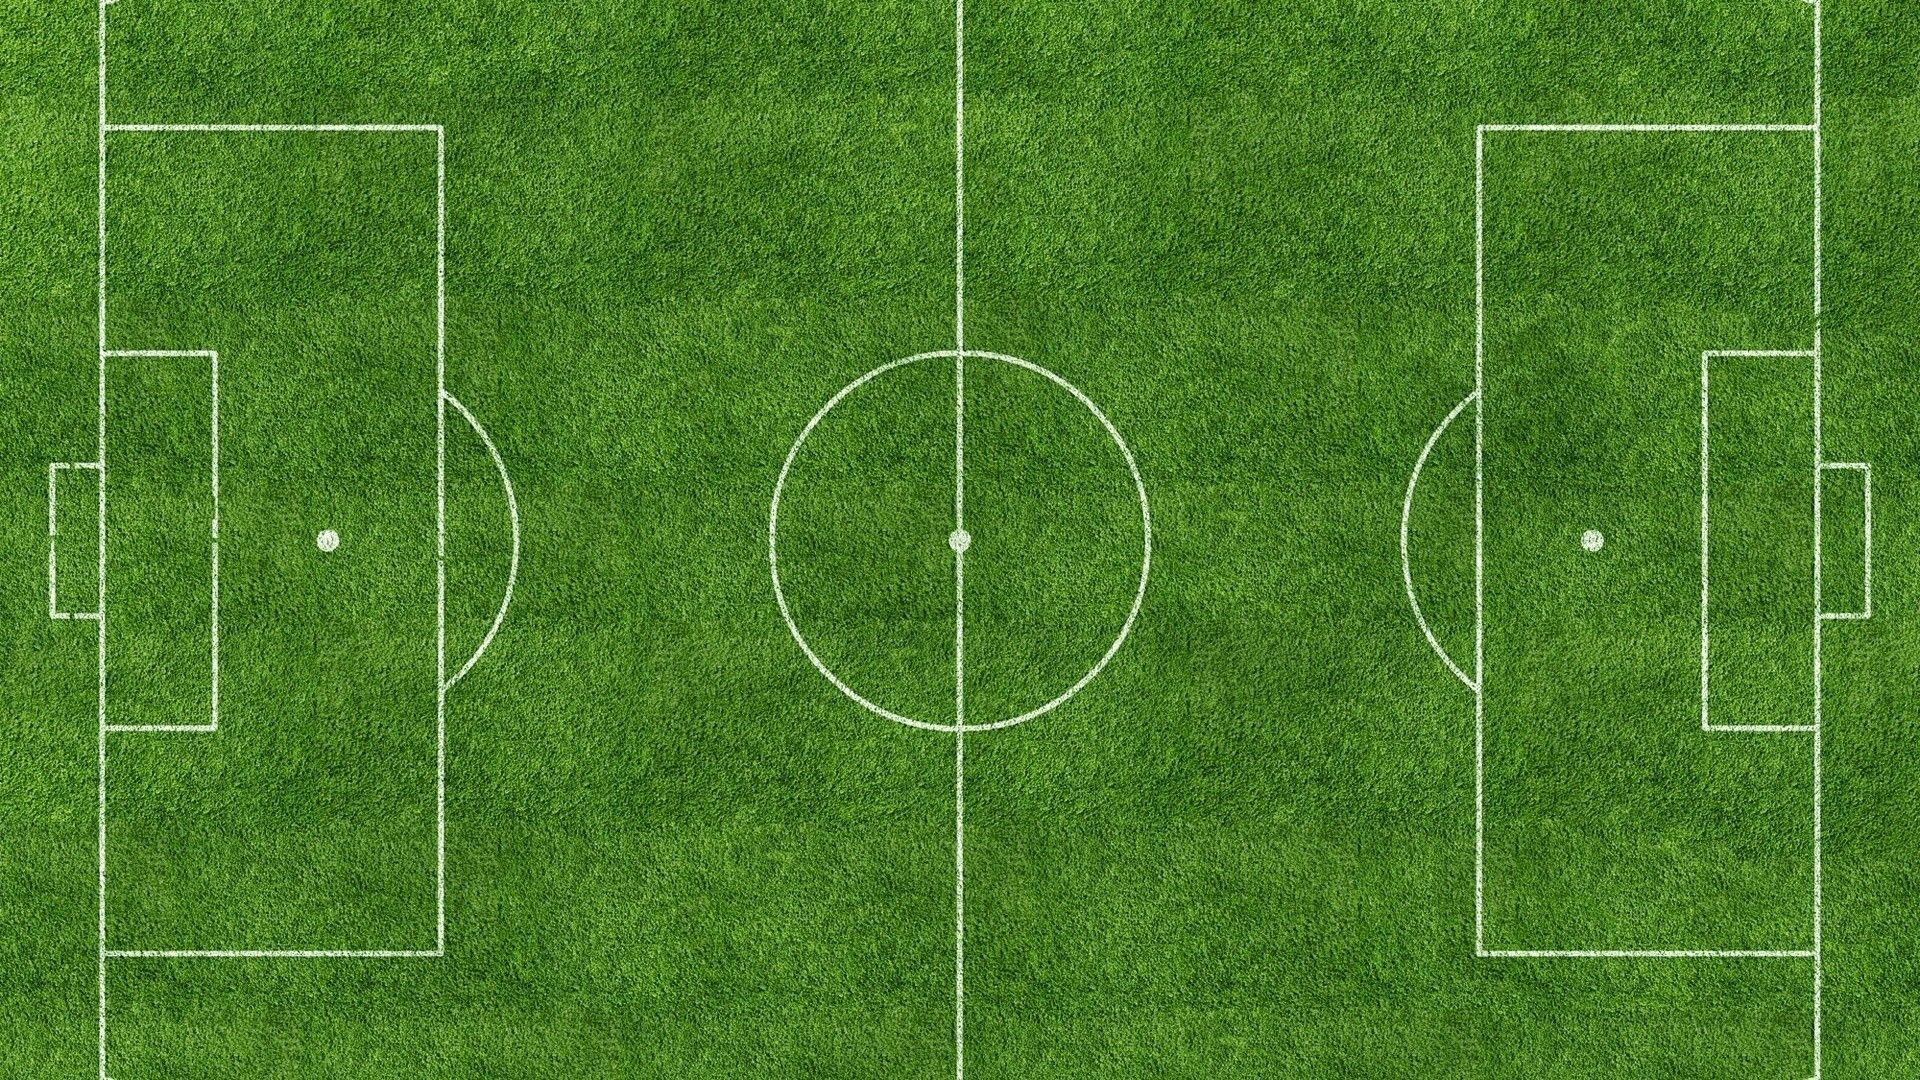 soccer Pitches, Grass Wallpaper HD / Desktop and Mobile Background